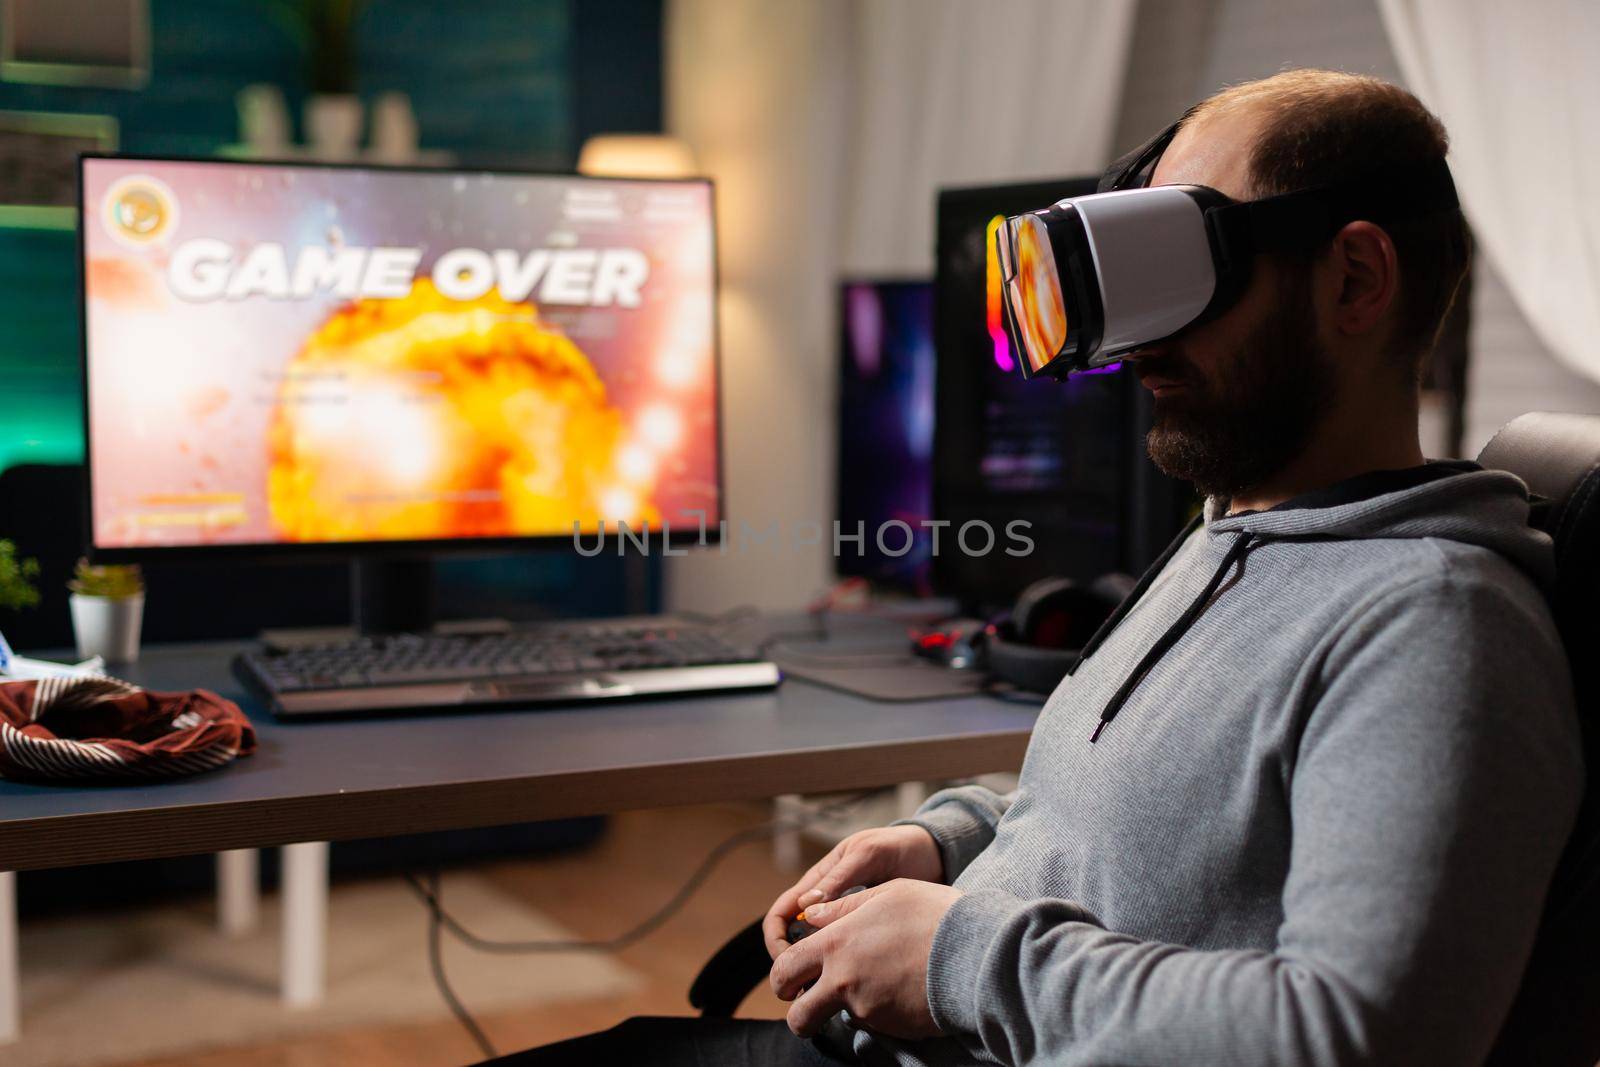 Defeated gamer man losing video game tournament playing with virtual reality headset. Competitive player using joystick for online competition late at night in gaming room